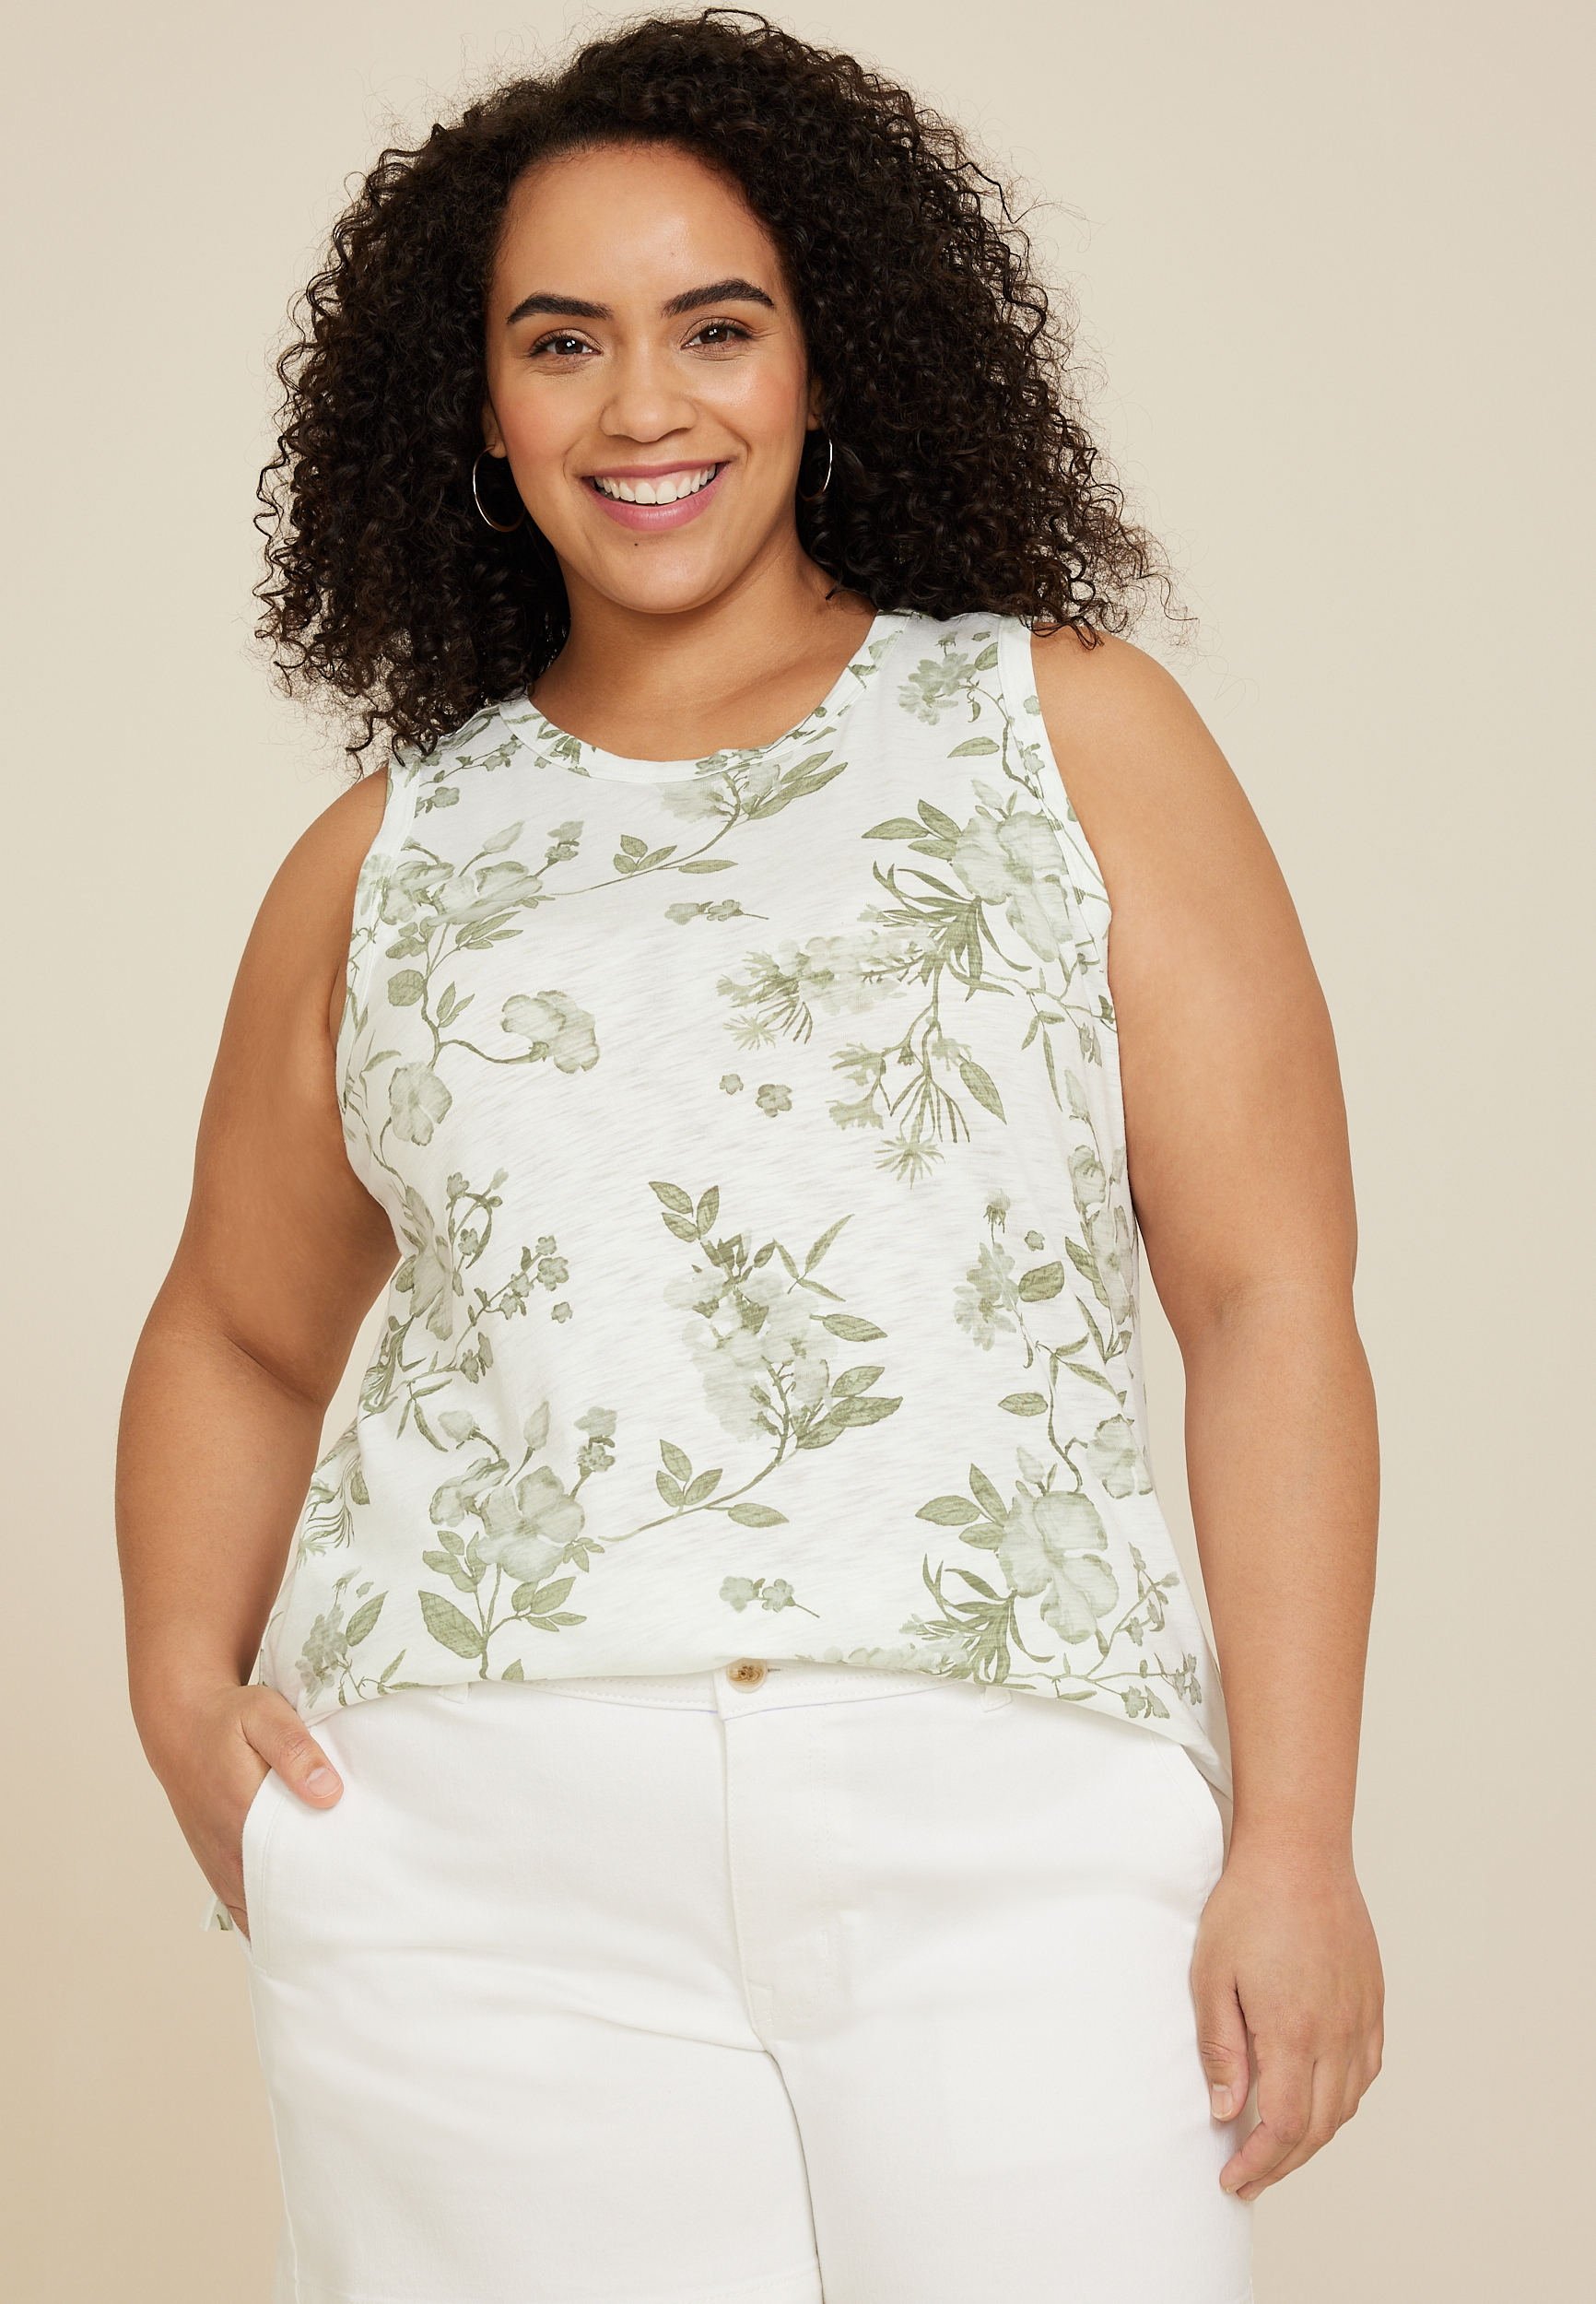 DIVAMORE Lace Tank Tops for Women, Plus Size, Camisole for Women